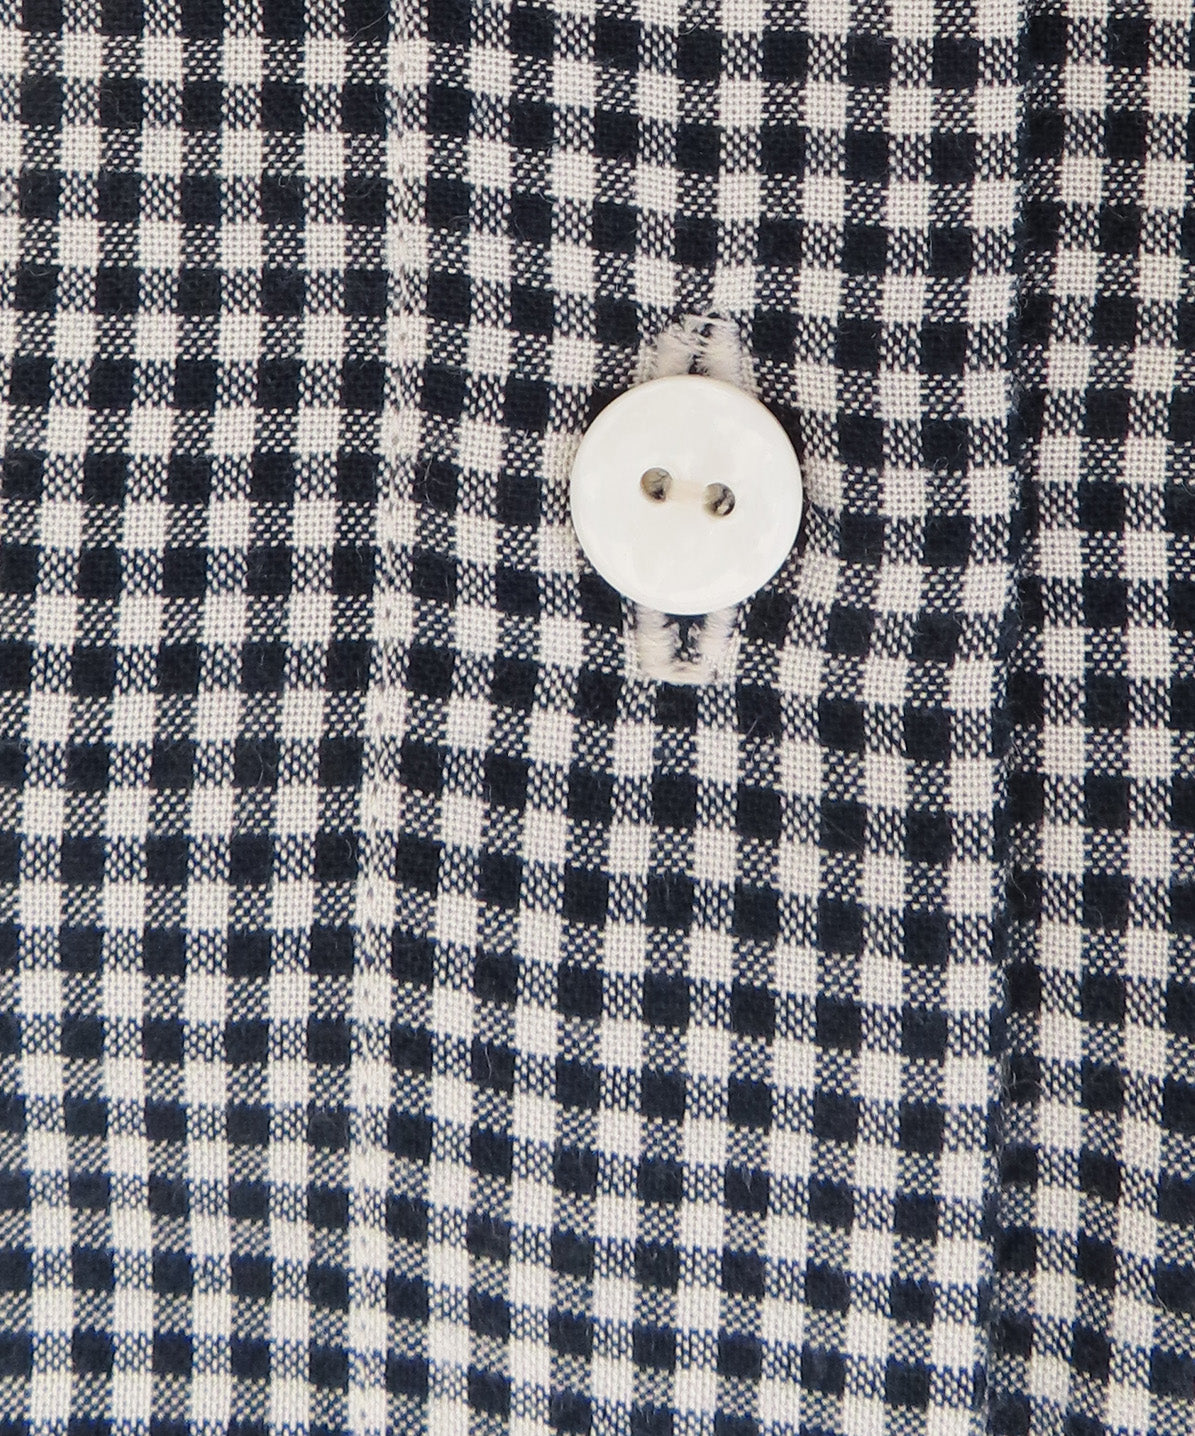 button and cloth detail of a gingham dress